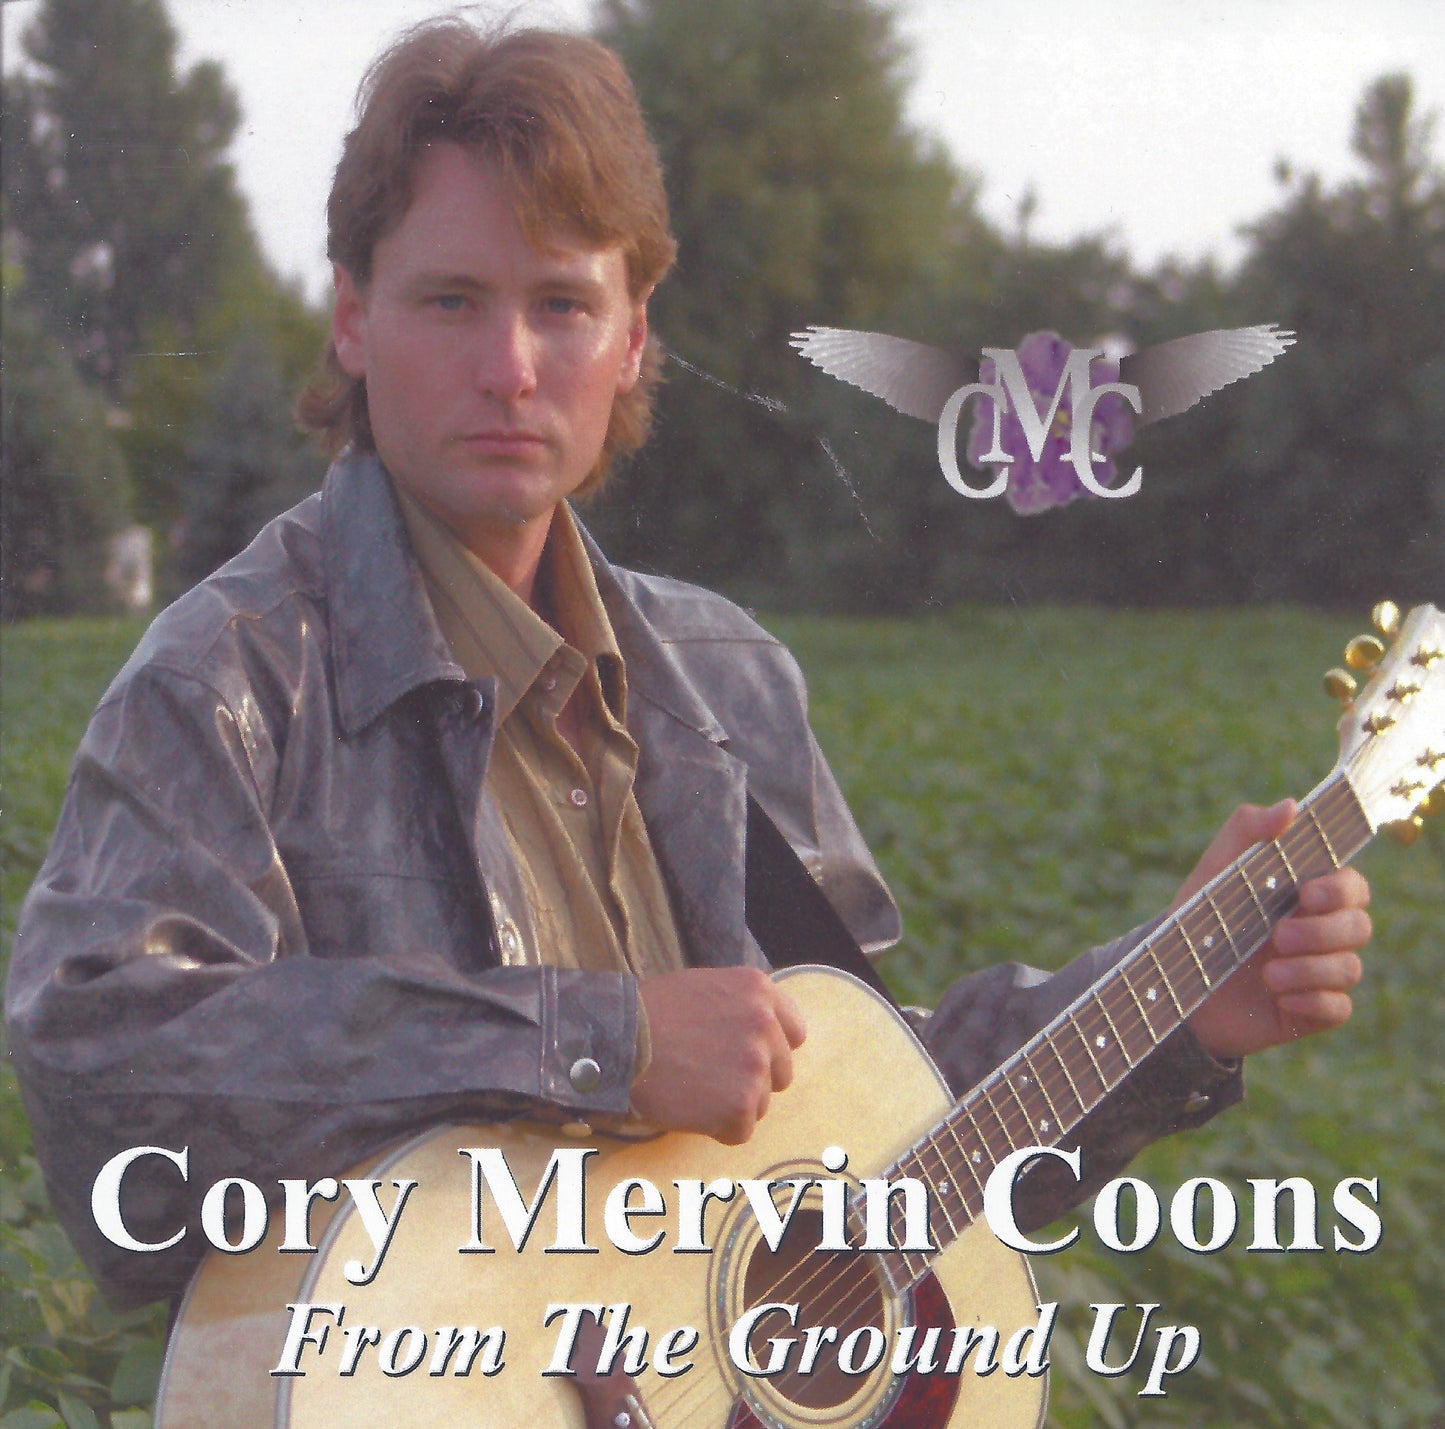 Better Things - Cory Mervin Coons